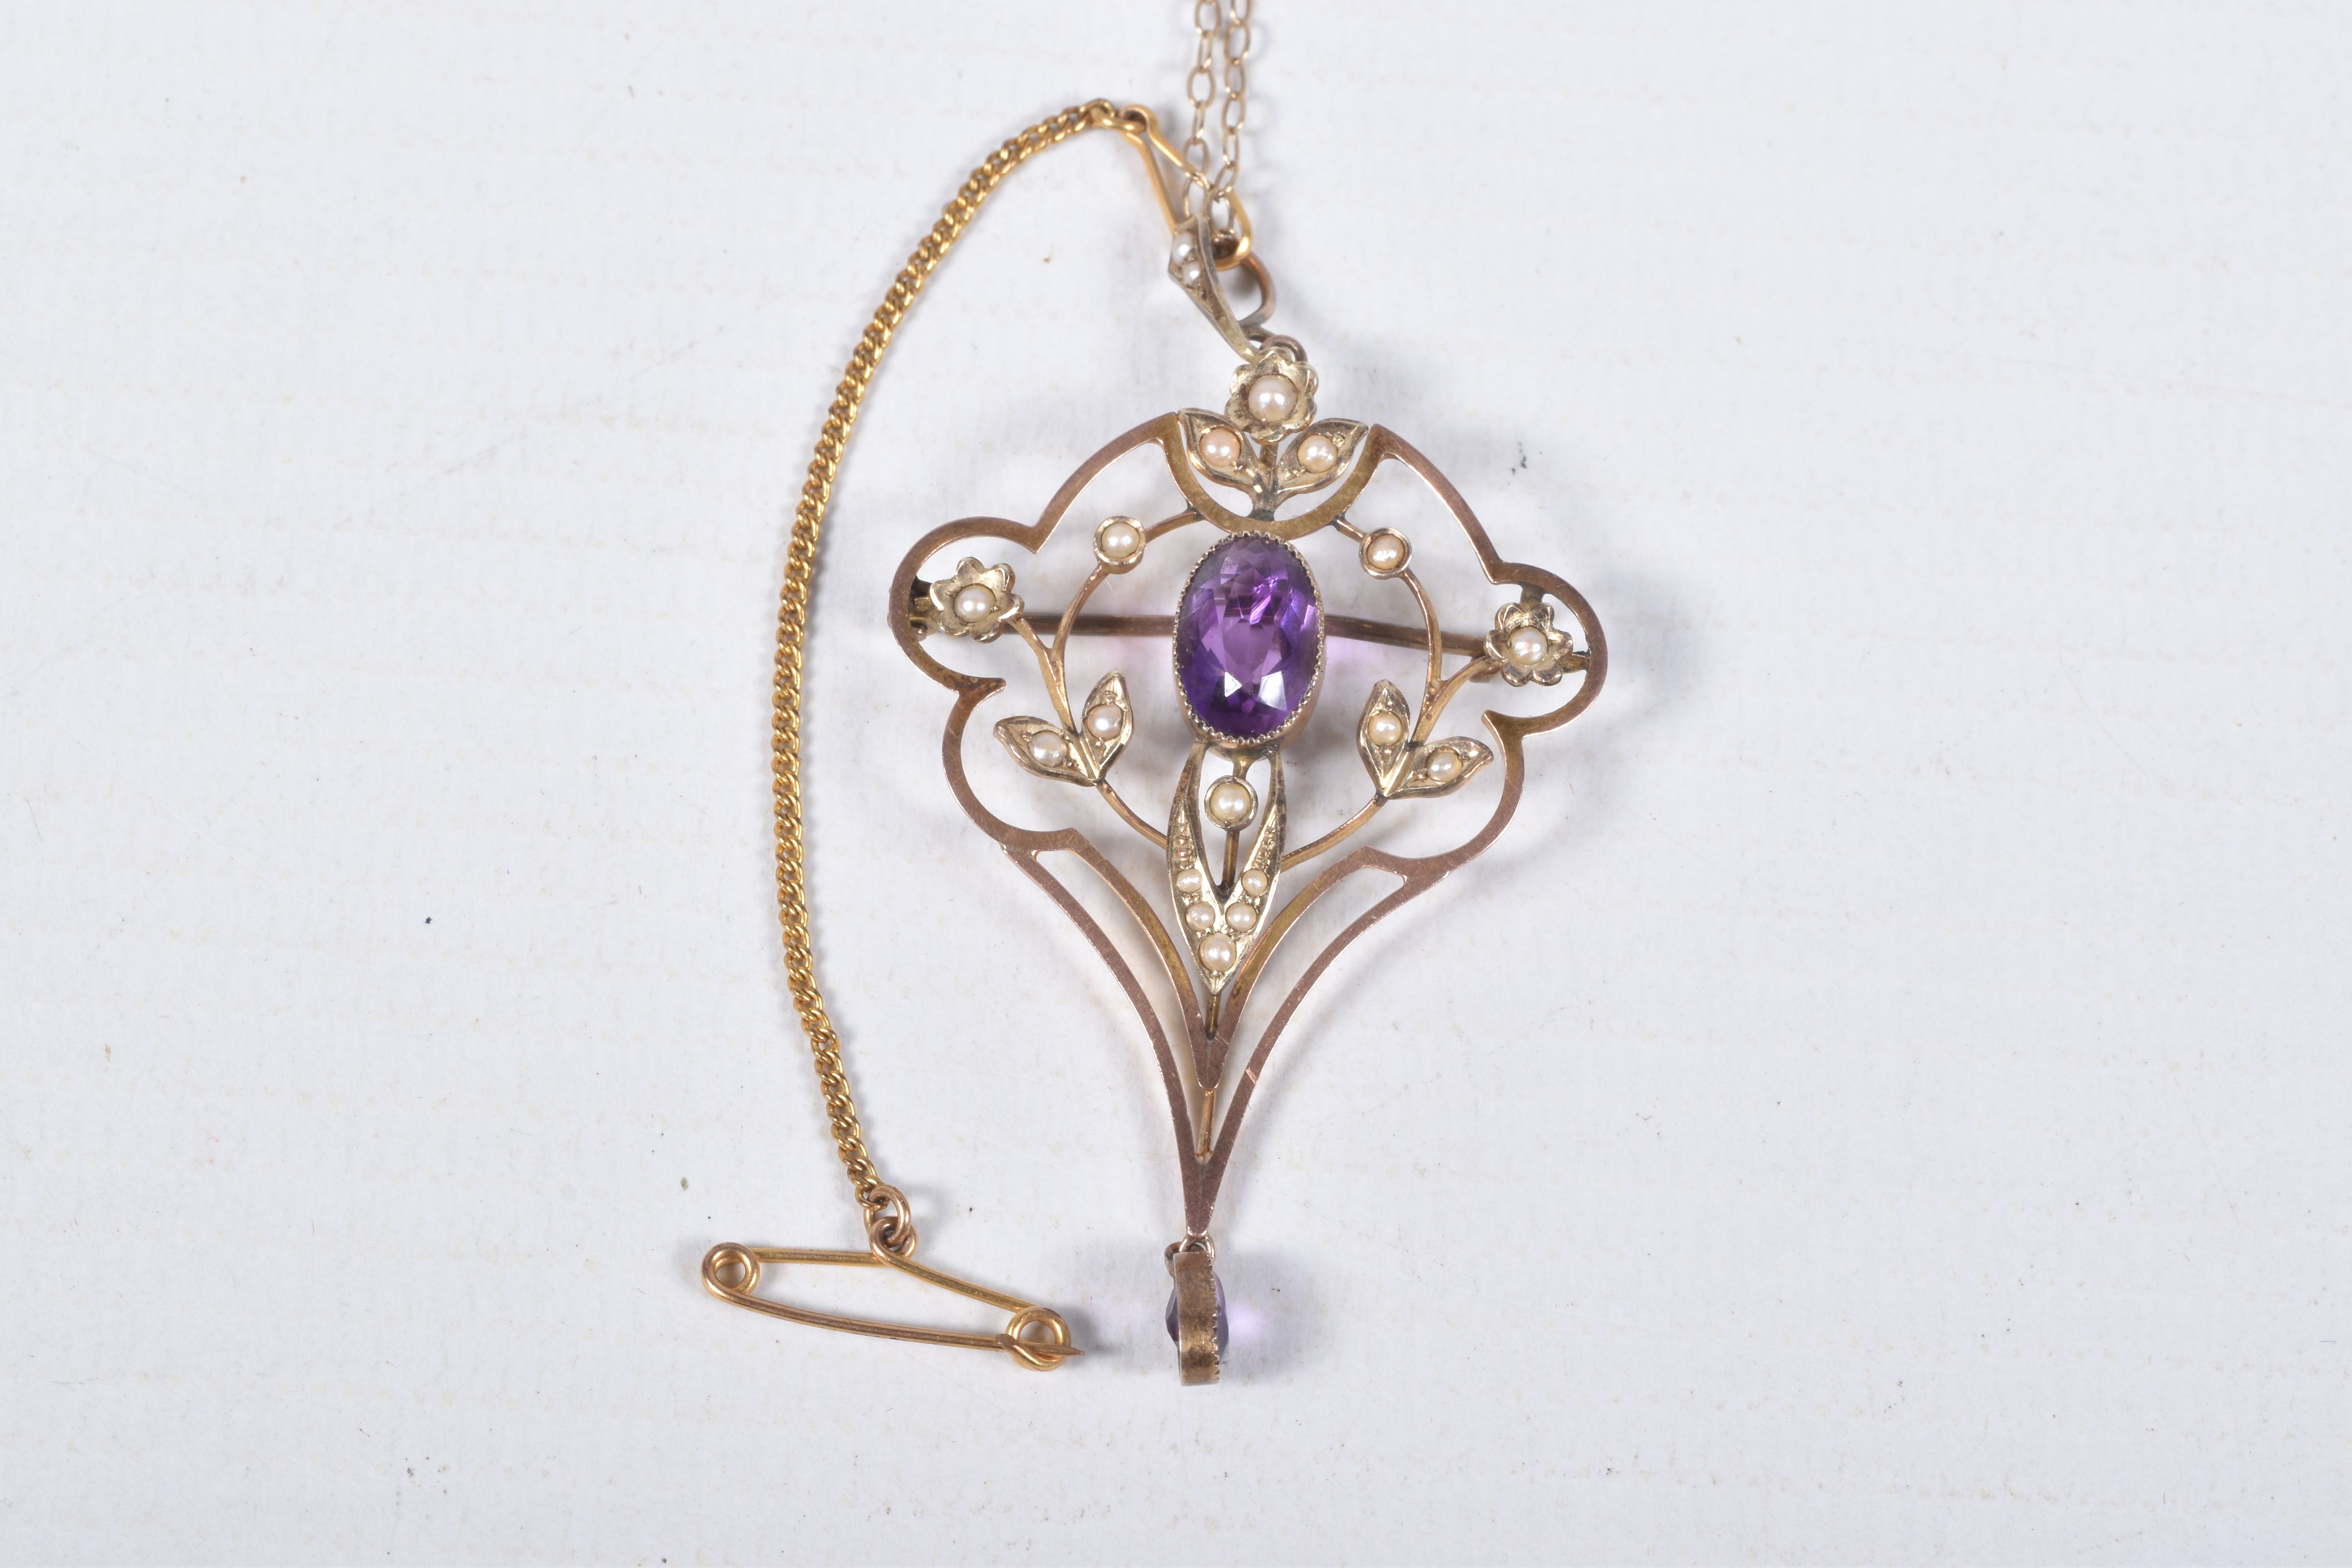 A BOXED YELLOW METAL EDWARDIAN LAVALIER PENDANT NECKLACE, open work floral detailed lavalier - Image 3 of 6